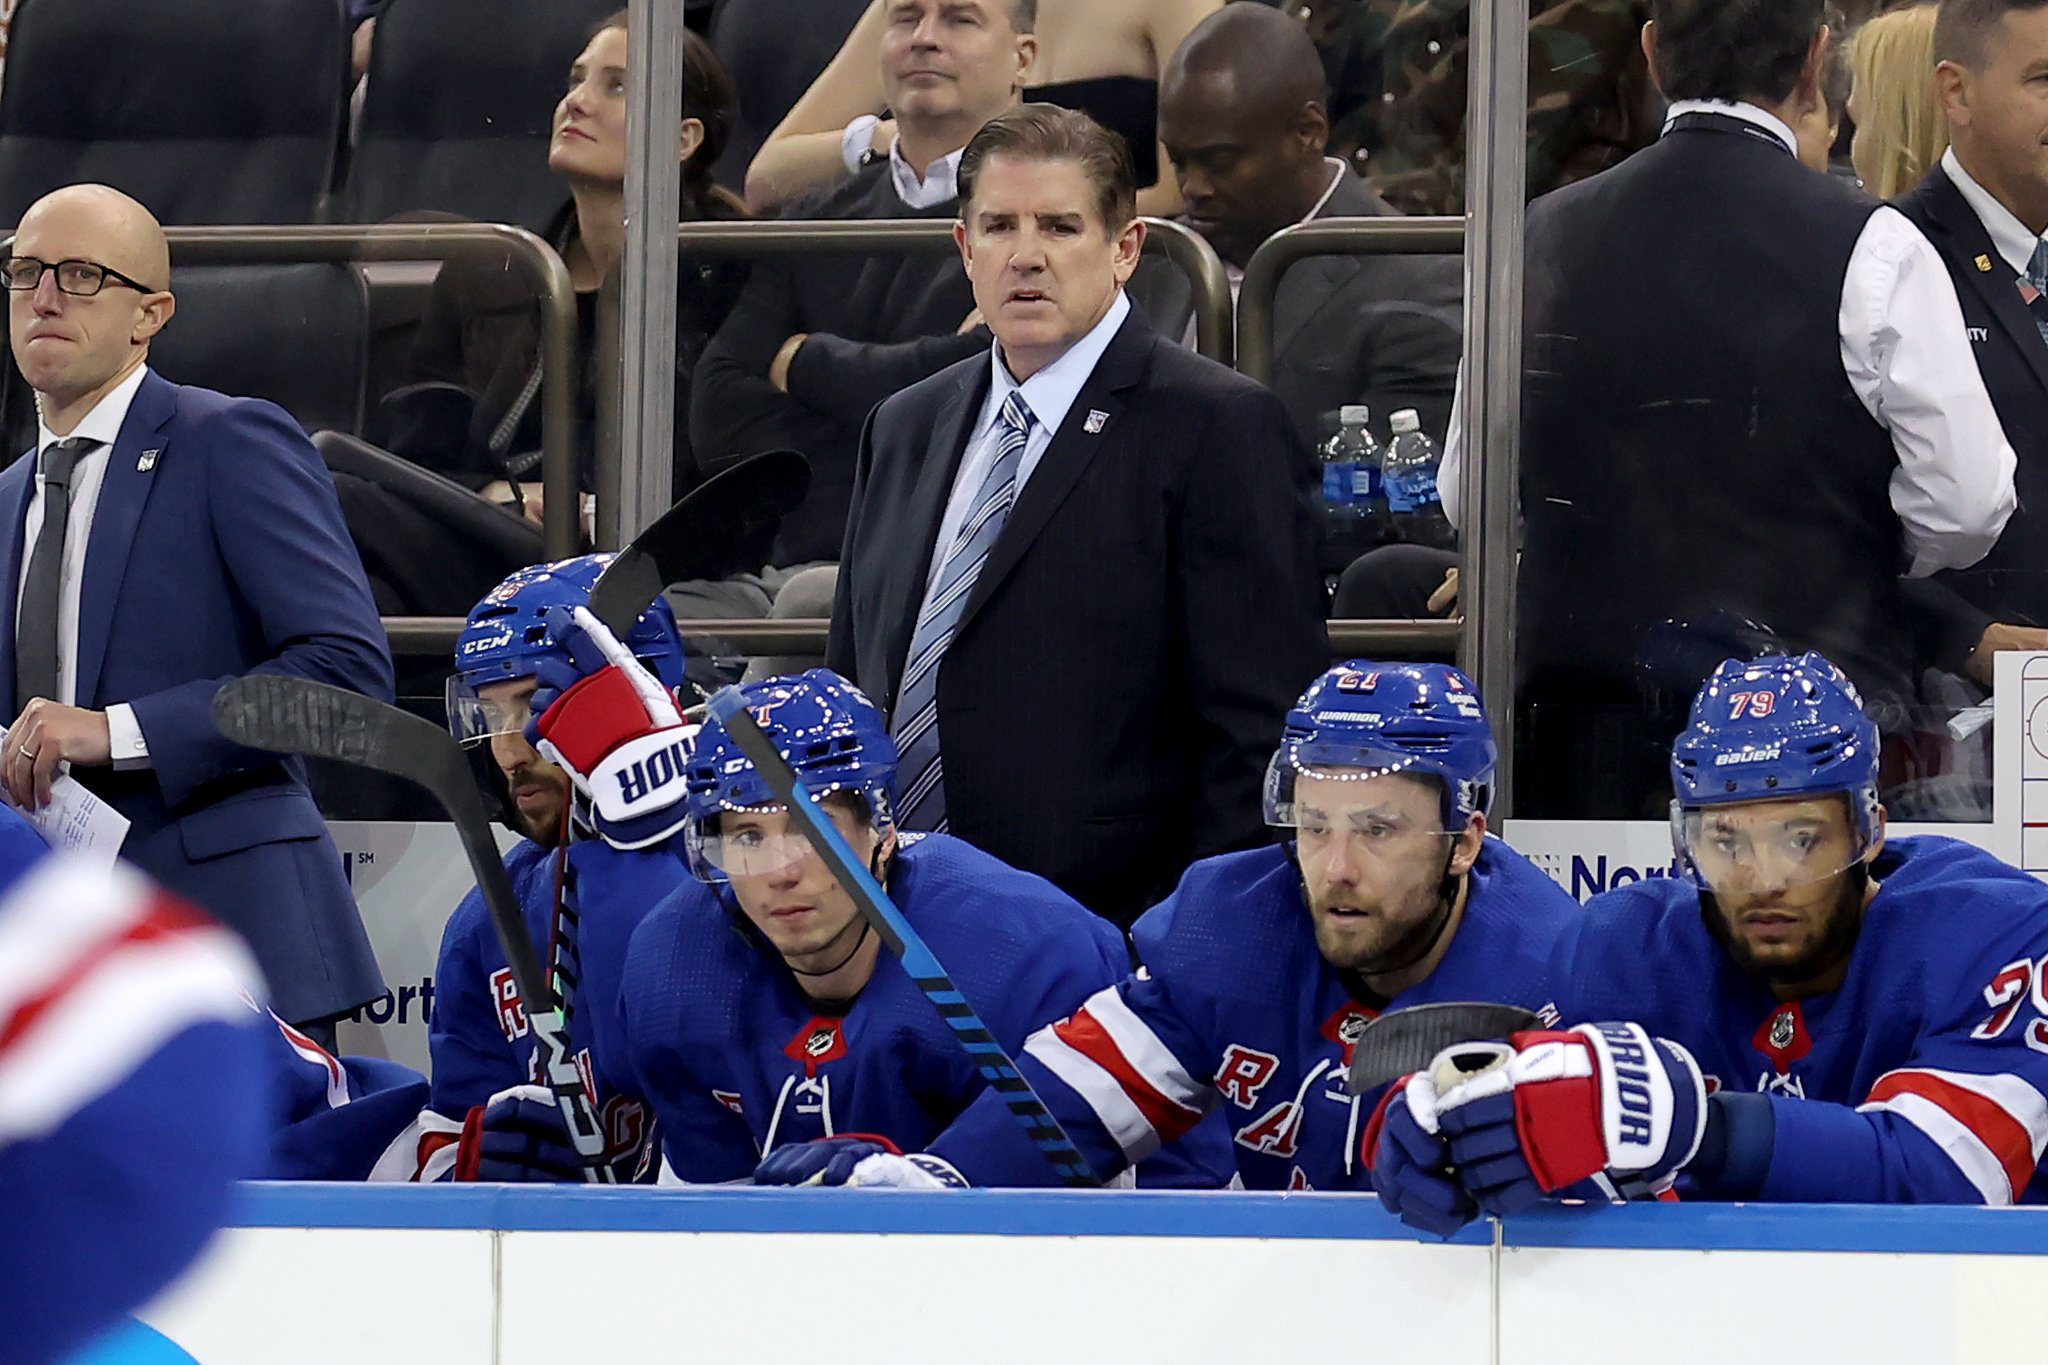 Consistency with new system eluding Peter Laviolette's Rangers